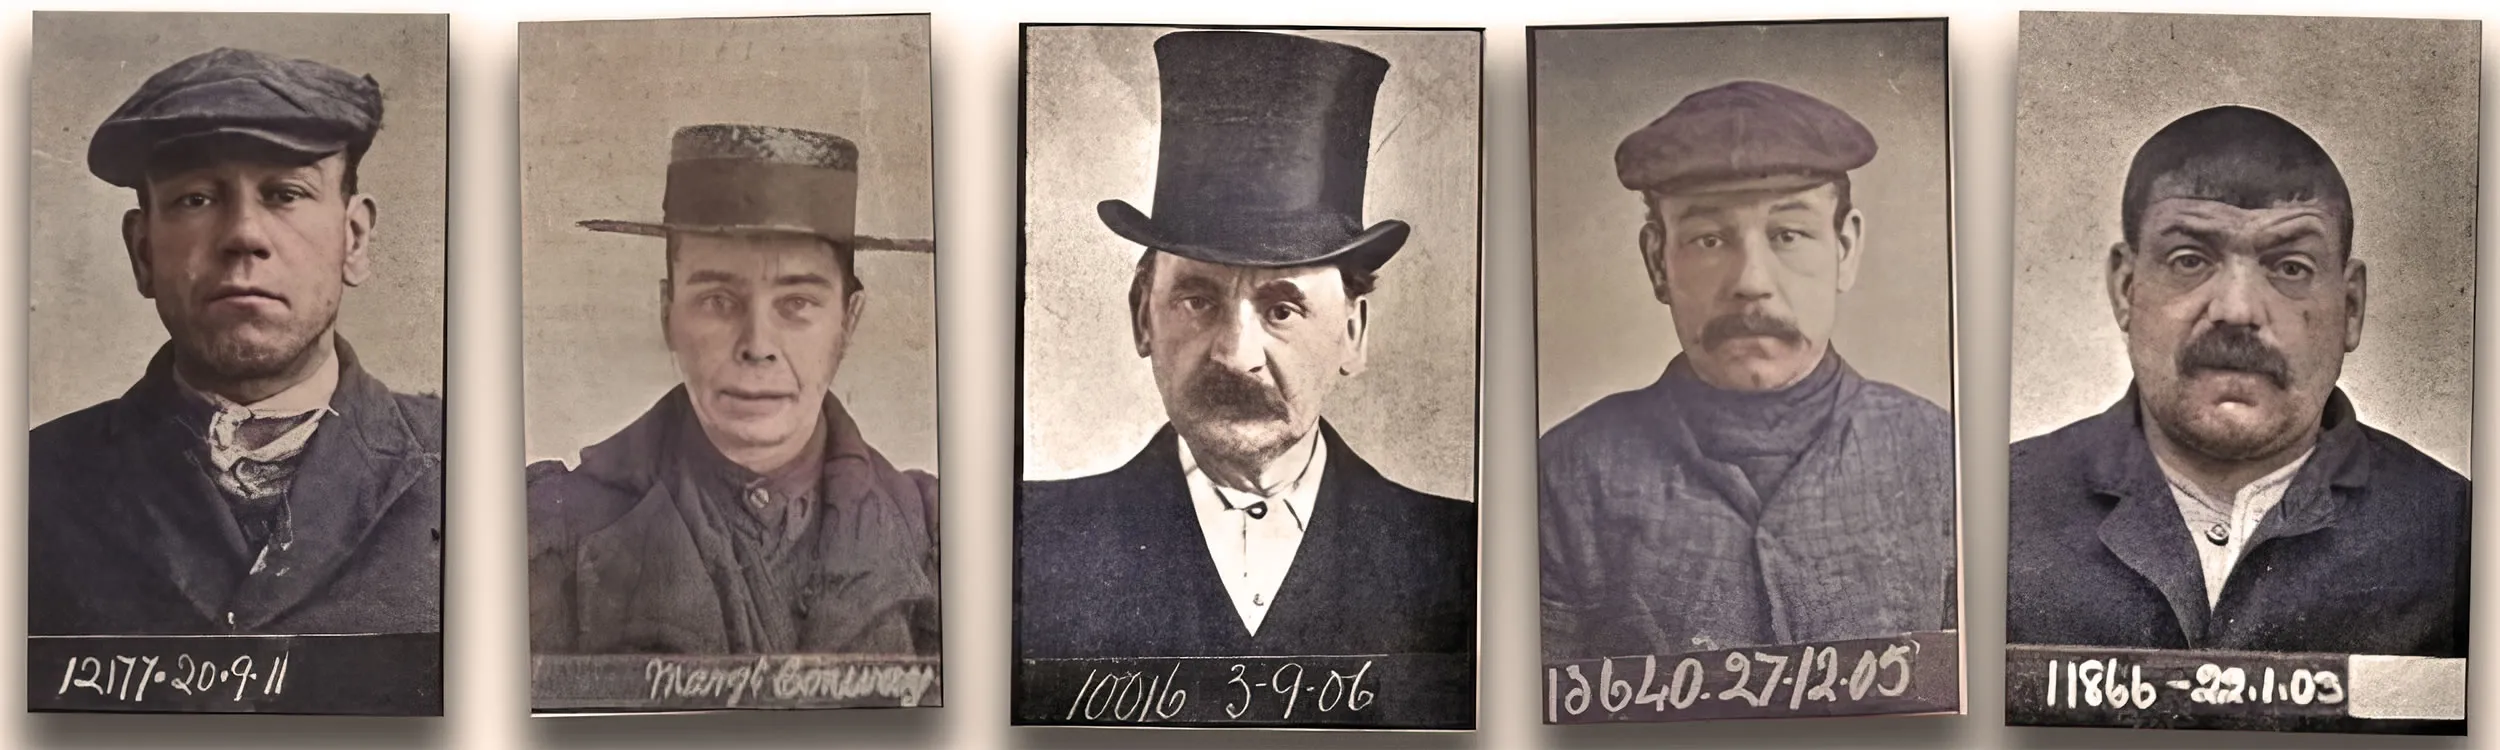 Criminal Records on TheGenealogist could reveal the darker side of your family tree